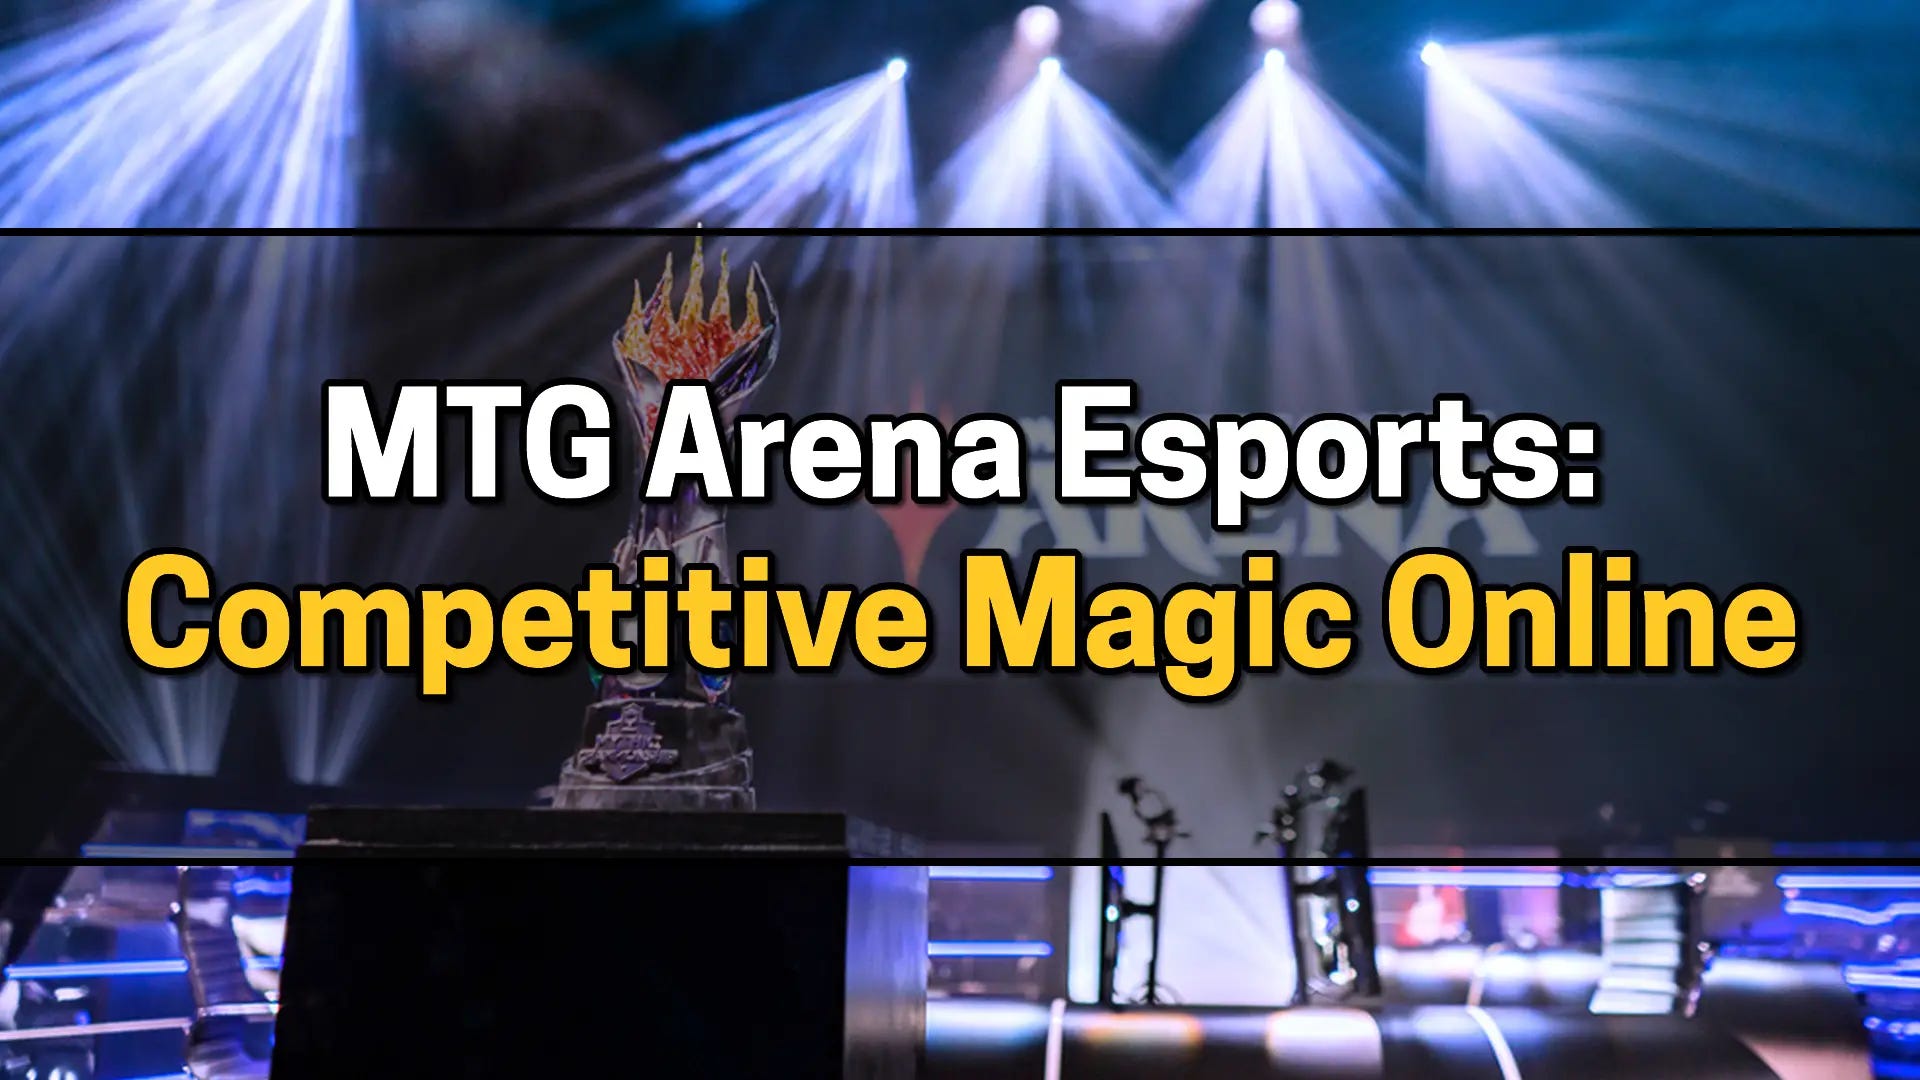 MTG Arena Esports: Competitive Magic Online, by Ray M